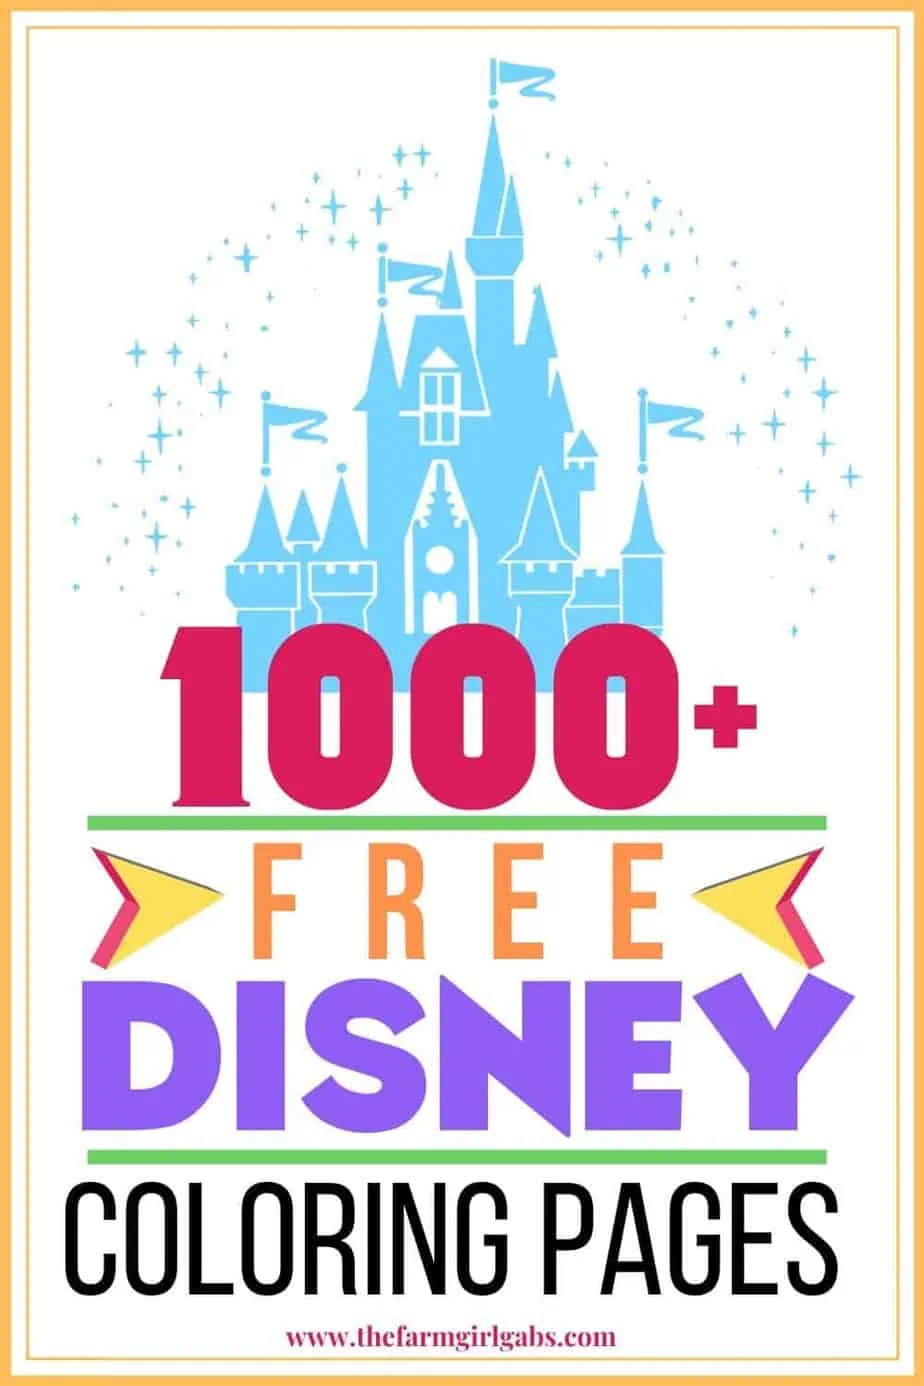 Free disney coloring pages for kids